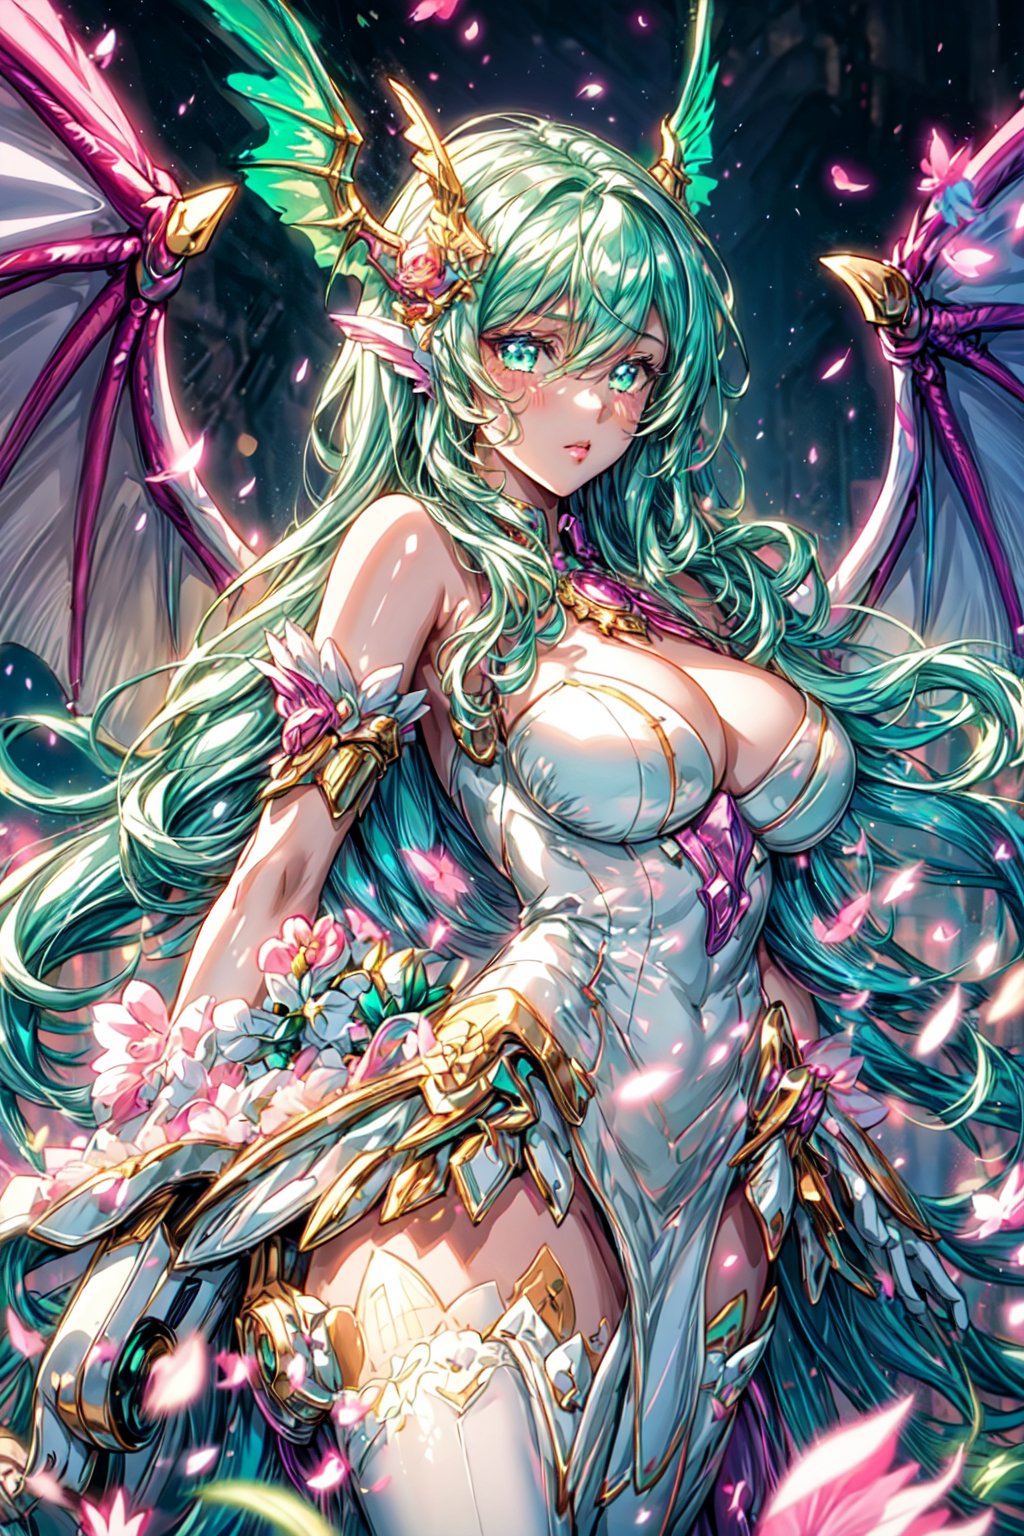 masterpiece, 1 girl, Extremely beautiful woman standing in a lake with very large glowing dragon wings, glowing hair, long cascading hair, neon mint green hair, mint green and white dress, twilight, lots of tiny fairies flying around, full lips, hyperdetailed face, detailed eyes, dynamic pose, cinematic lighting, pastel colors, perfect hands, dragon girl, girl with dragon wings, dark fantasy